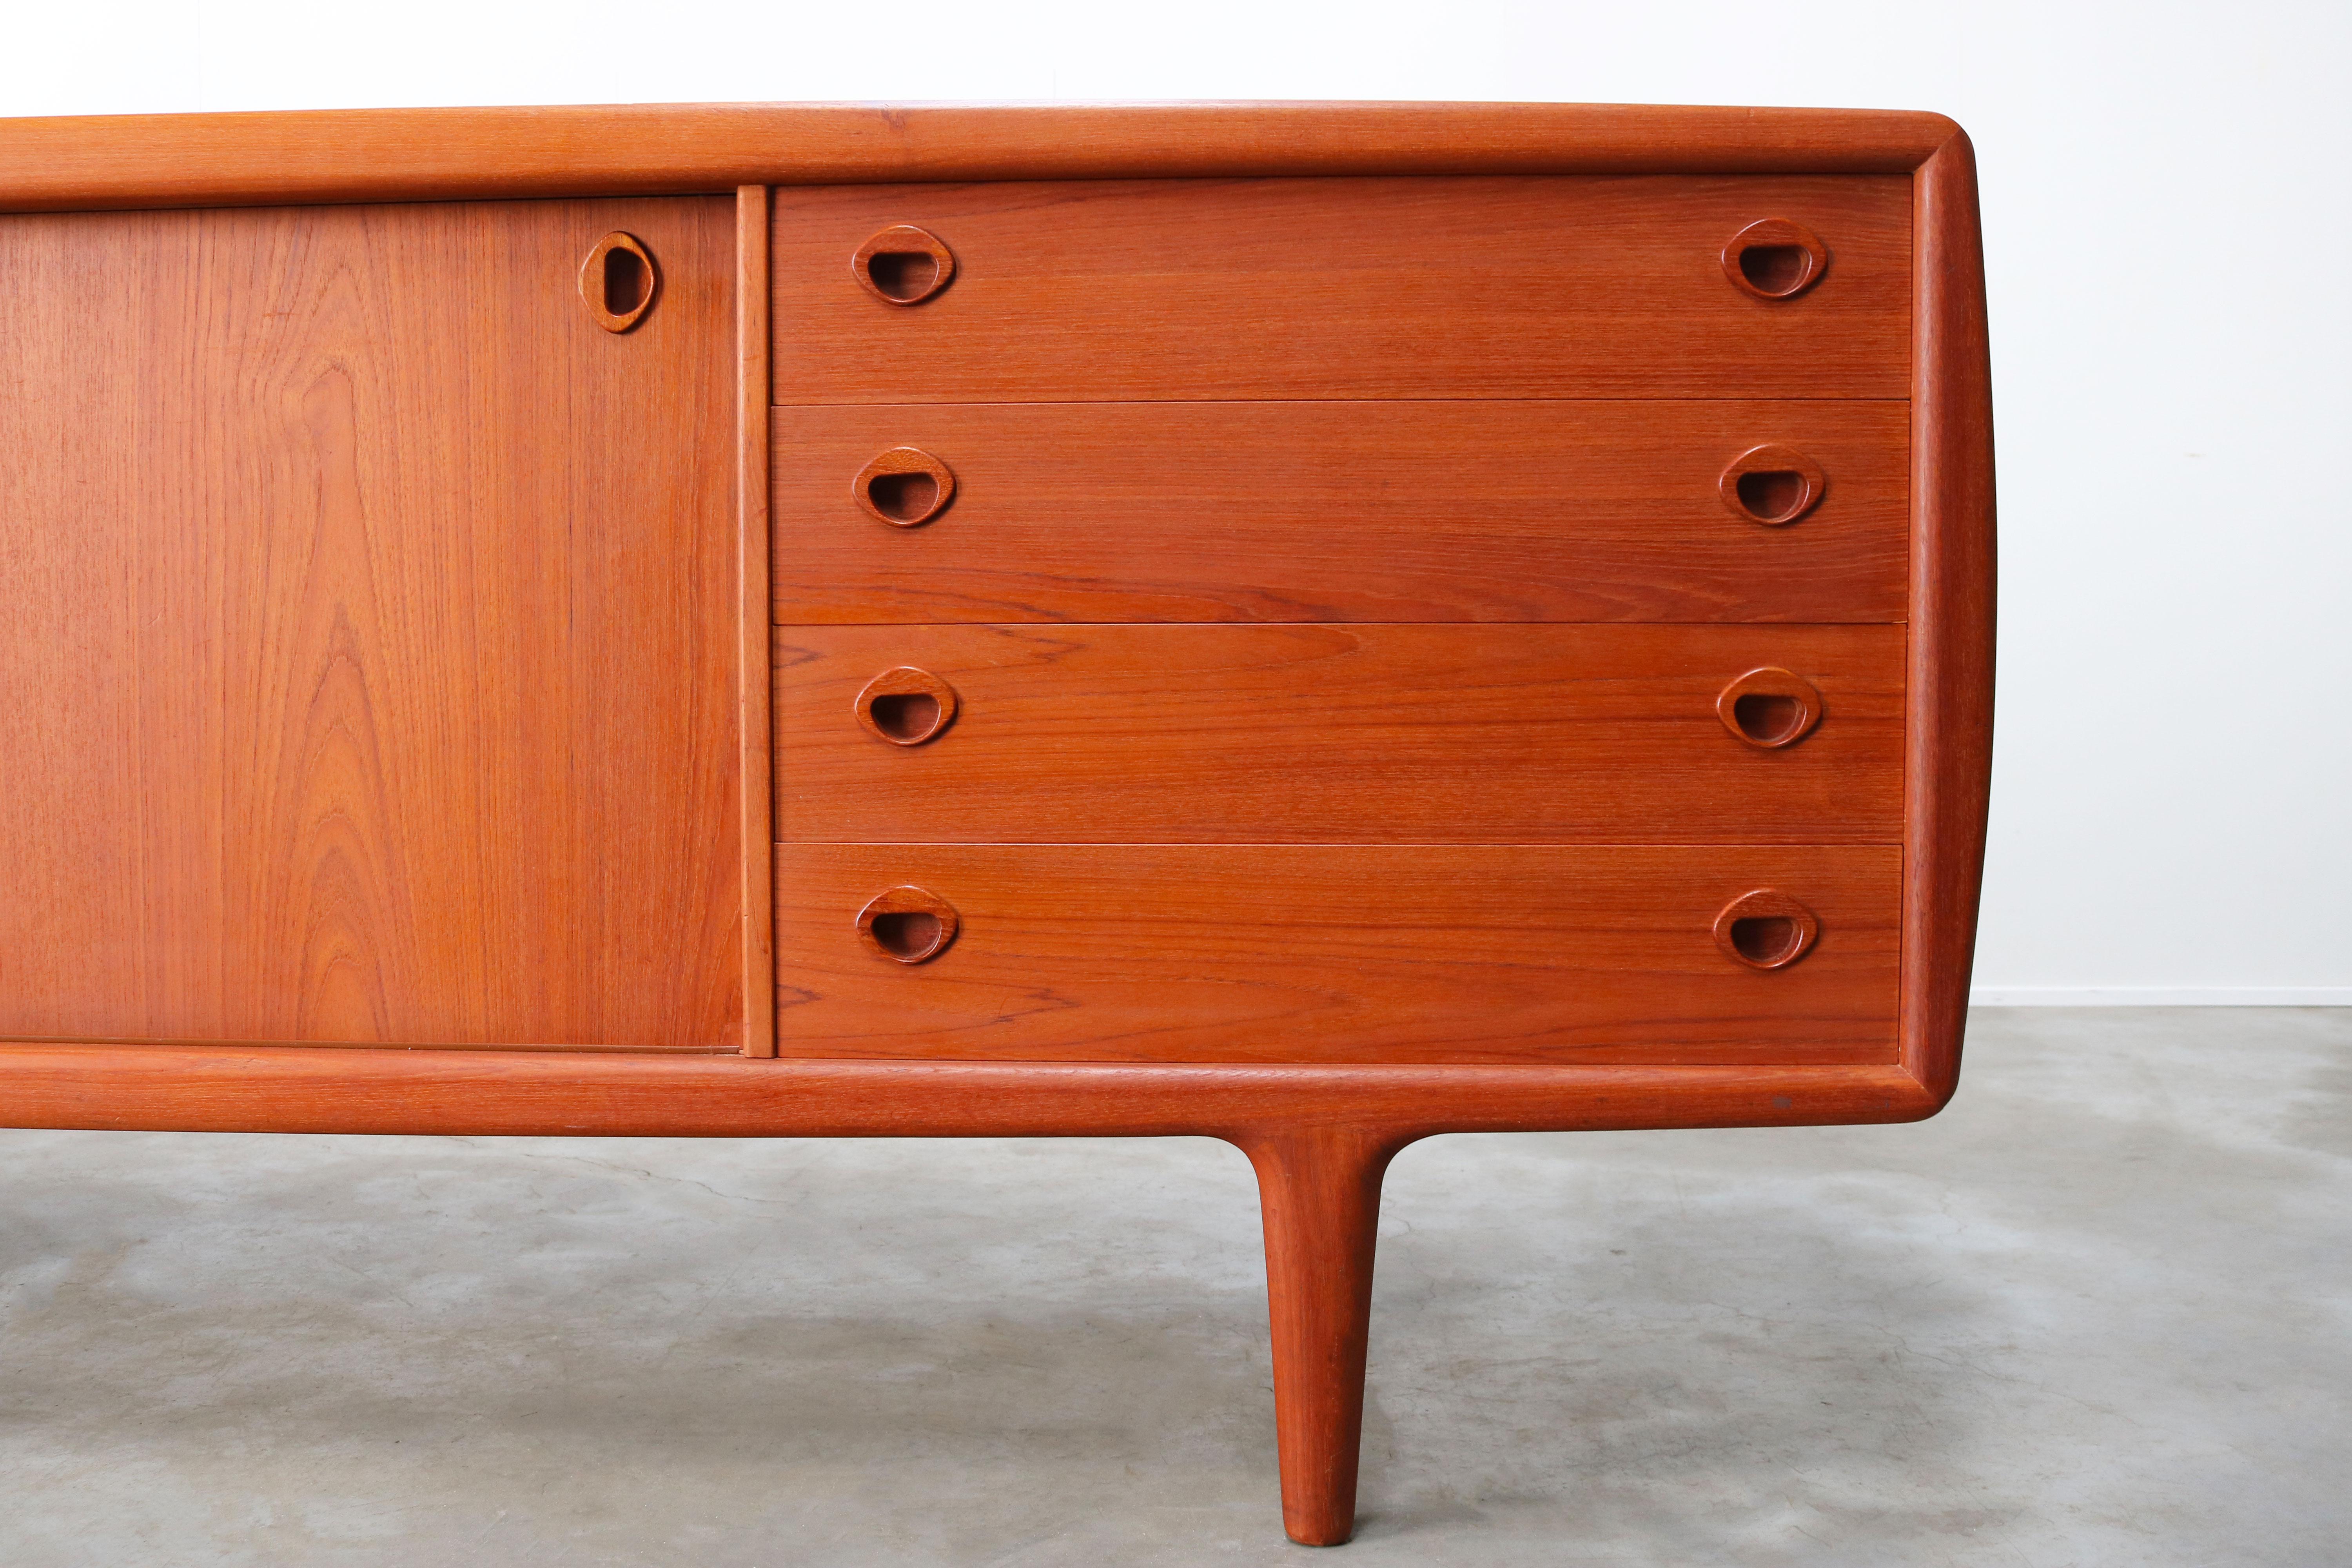 Magnificent Danish design sideboard or credenza by H.P. Hansen in the 1950s. Wonderful organic sculpted teak with warm and beautiful wood grain.
The sideboard has 2 sliding doors and 4 drawers and multiple adjustable shelves providing plenty of